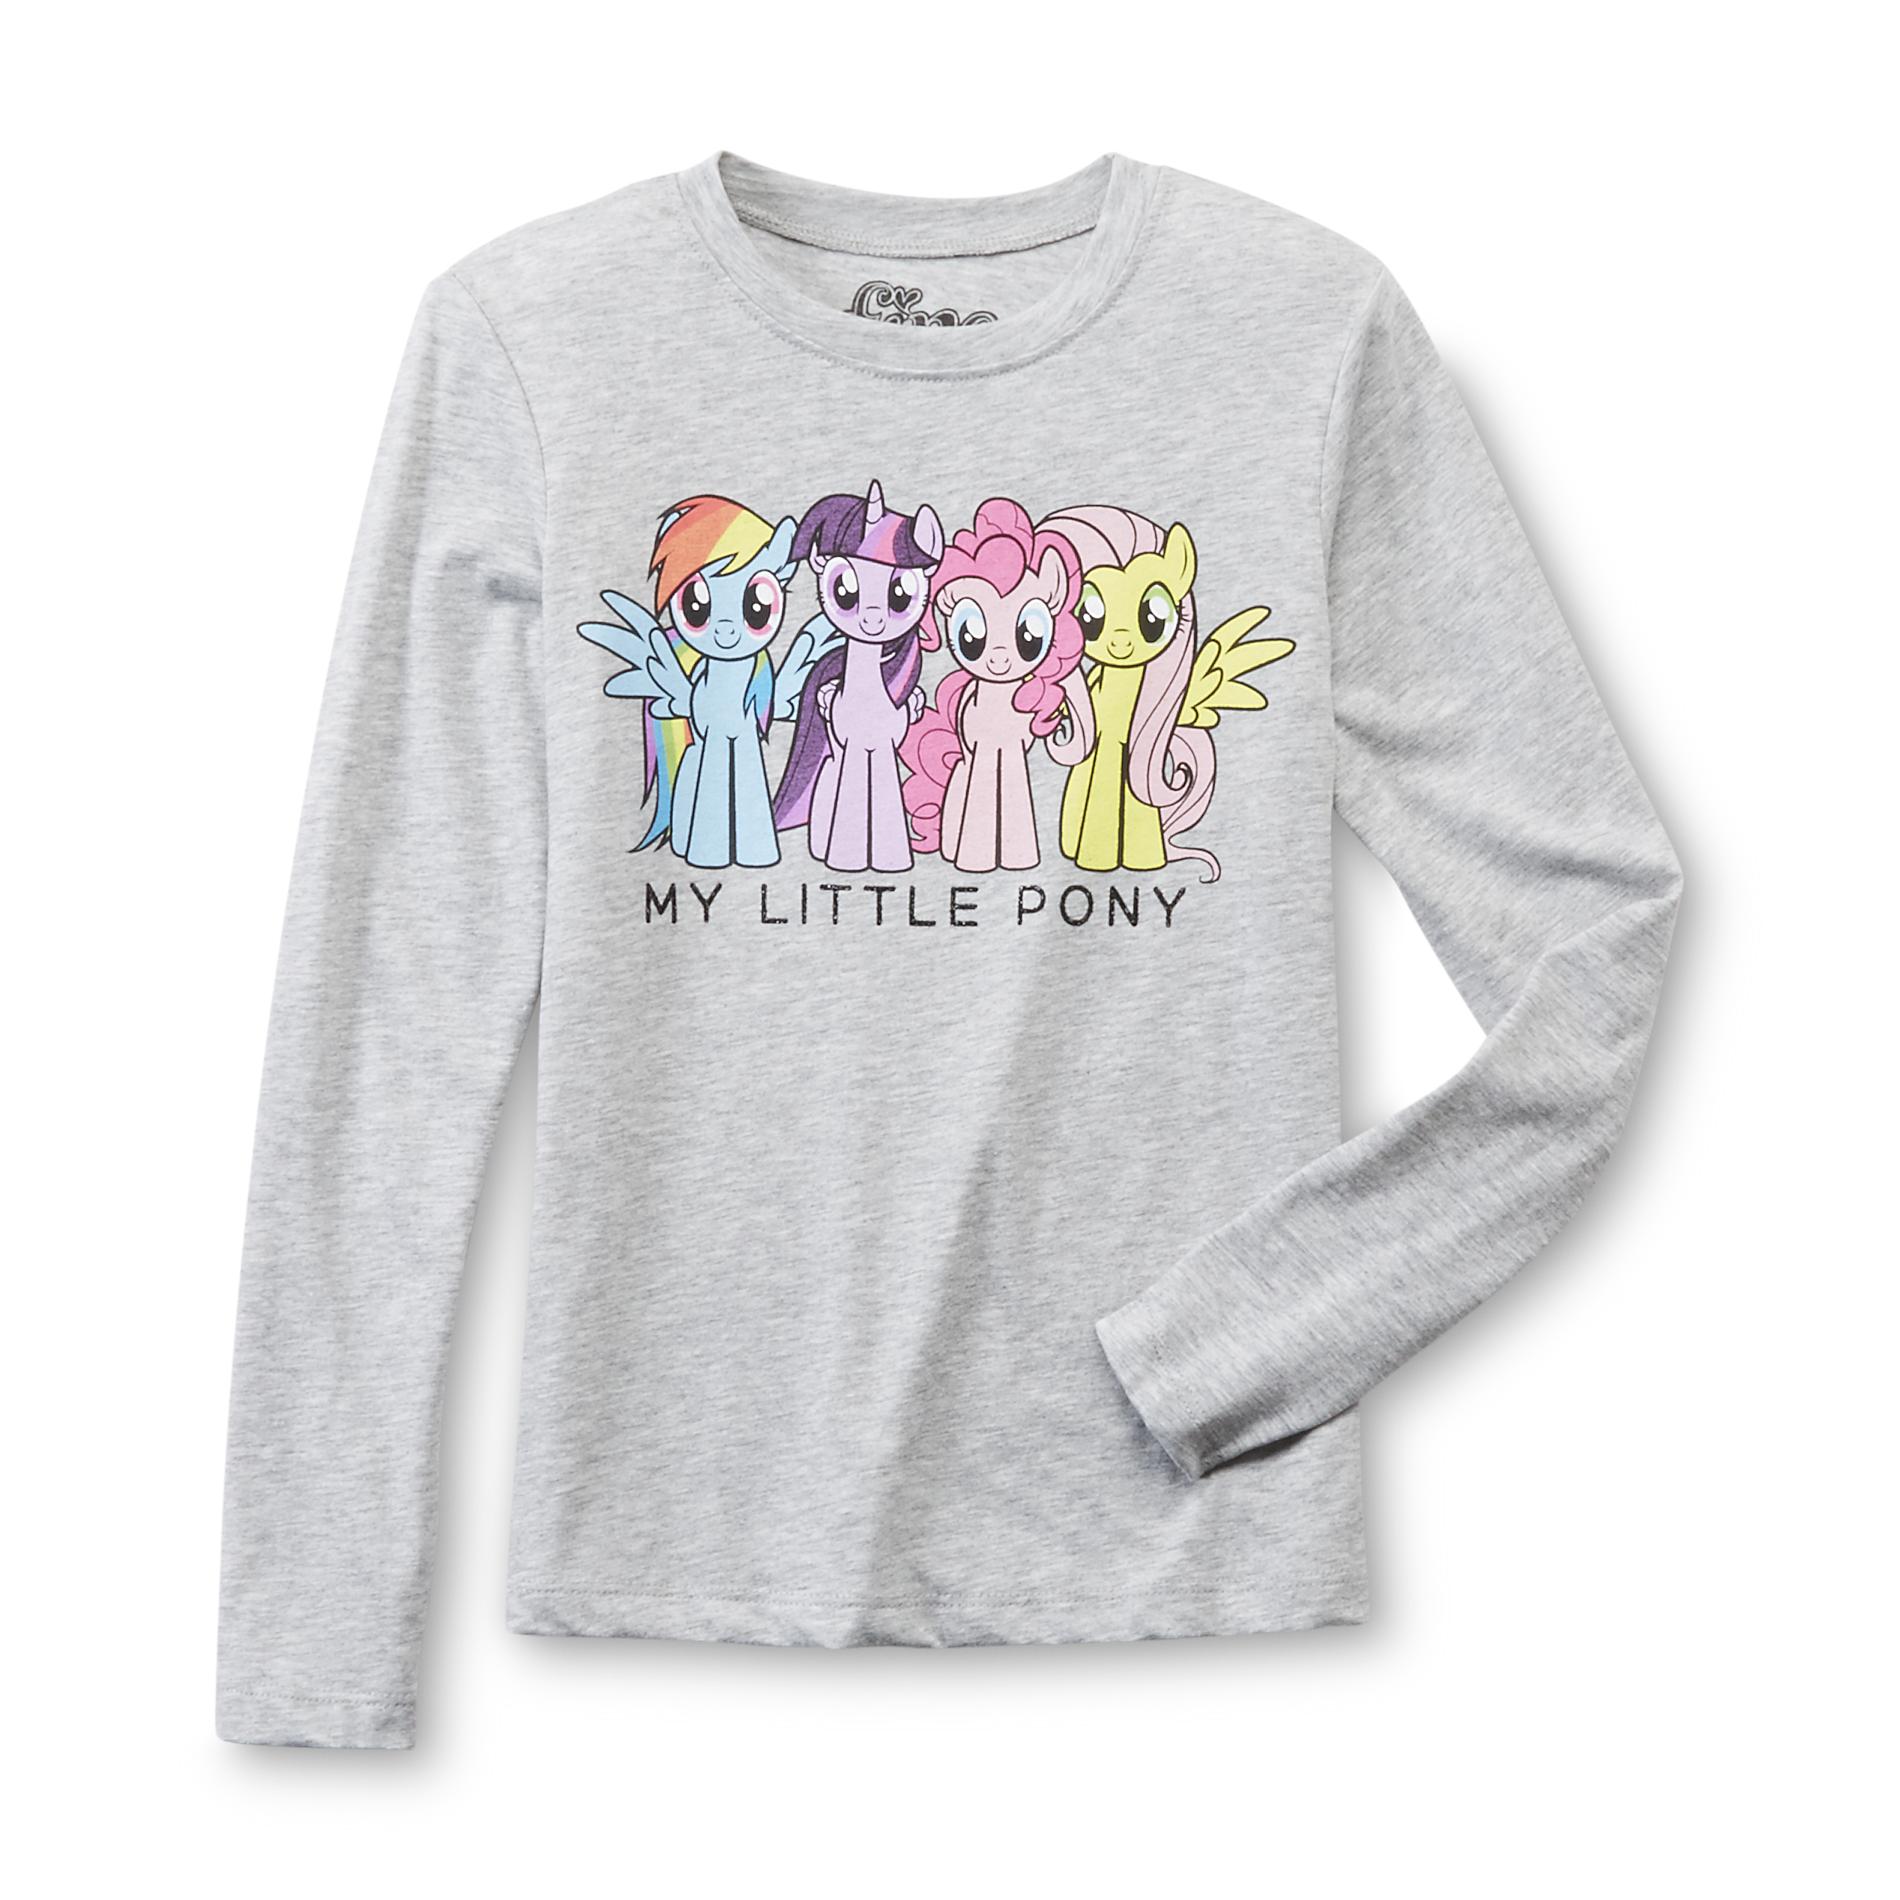 My Little Pony Girl's Graphic Top